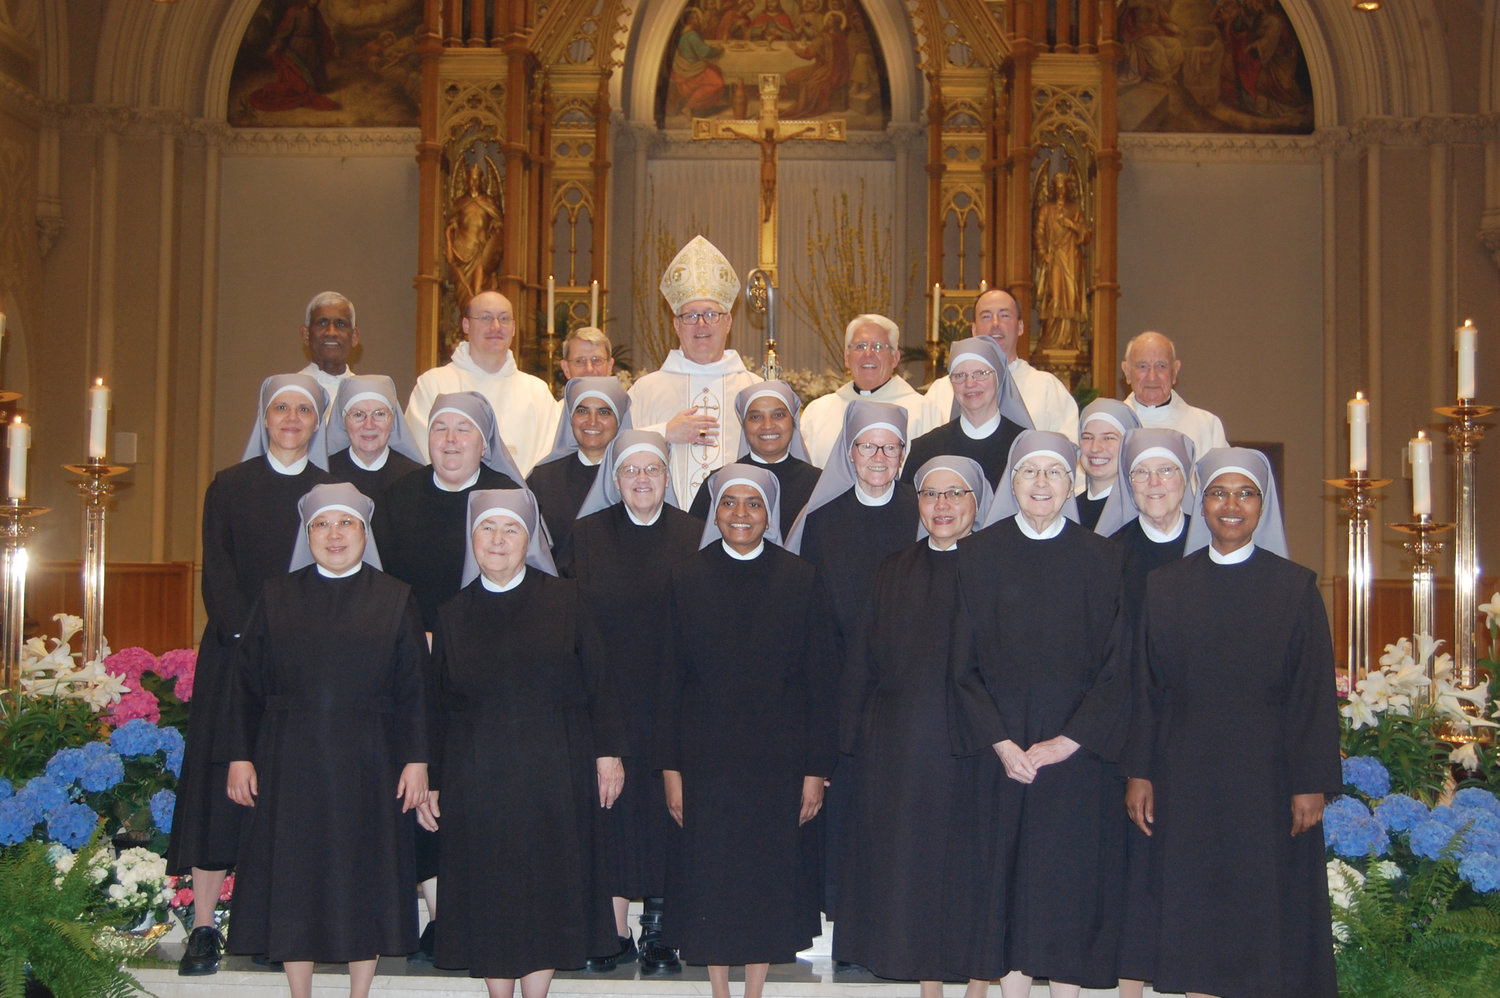 Bishop Thomas J. Tobin and priests from the Diocese of Providence join in celebrating the Little Sisters of the Poor, from the Jeanne Jugan Residence of Pawtucket, as they commemorate the 150th anniversary of the sisters’ mission in the United States of America with a special anniversary Mass on Saturday, May 4, at the Cathedral of SS. Peter and Paul.